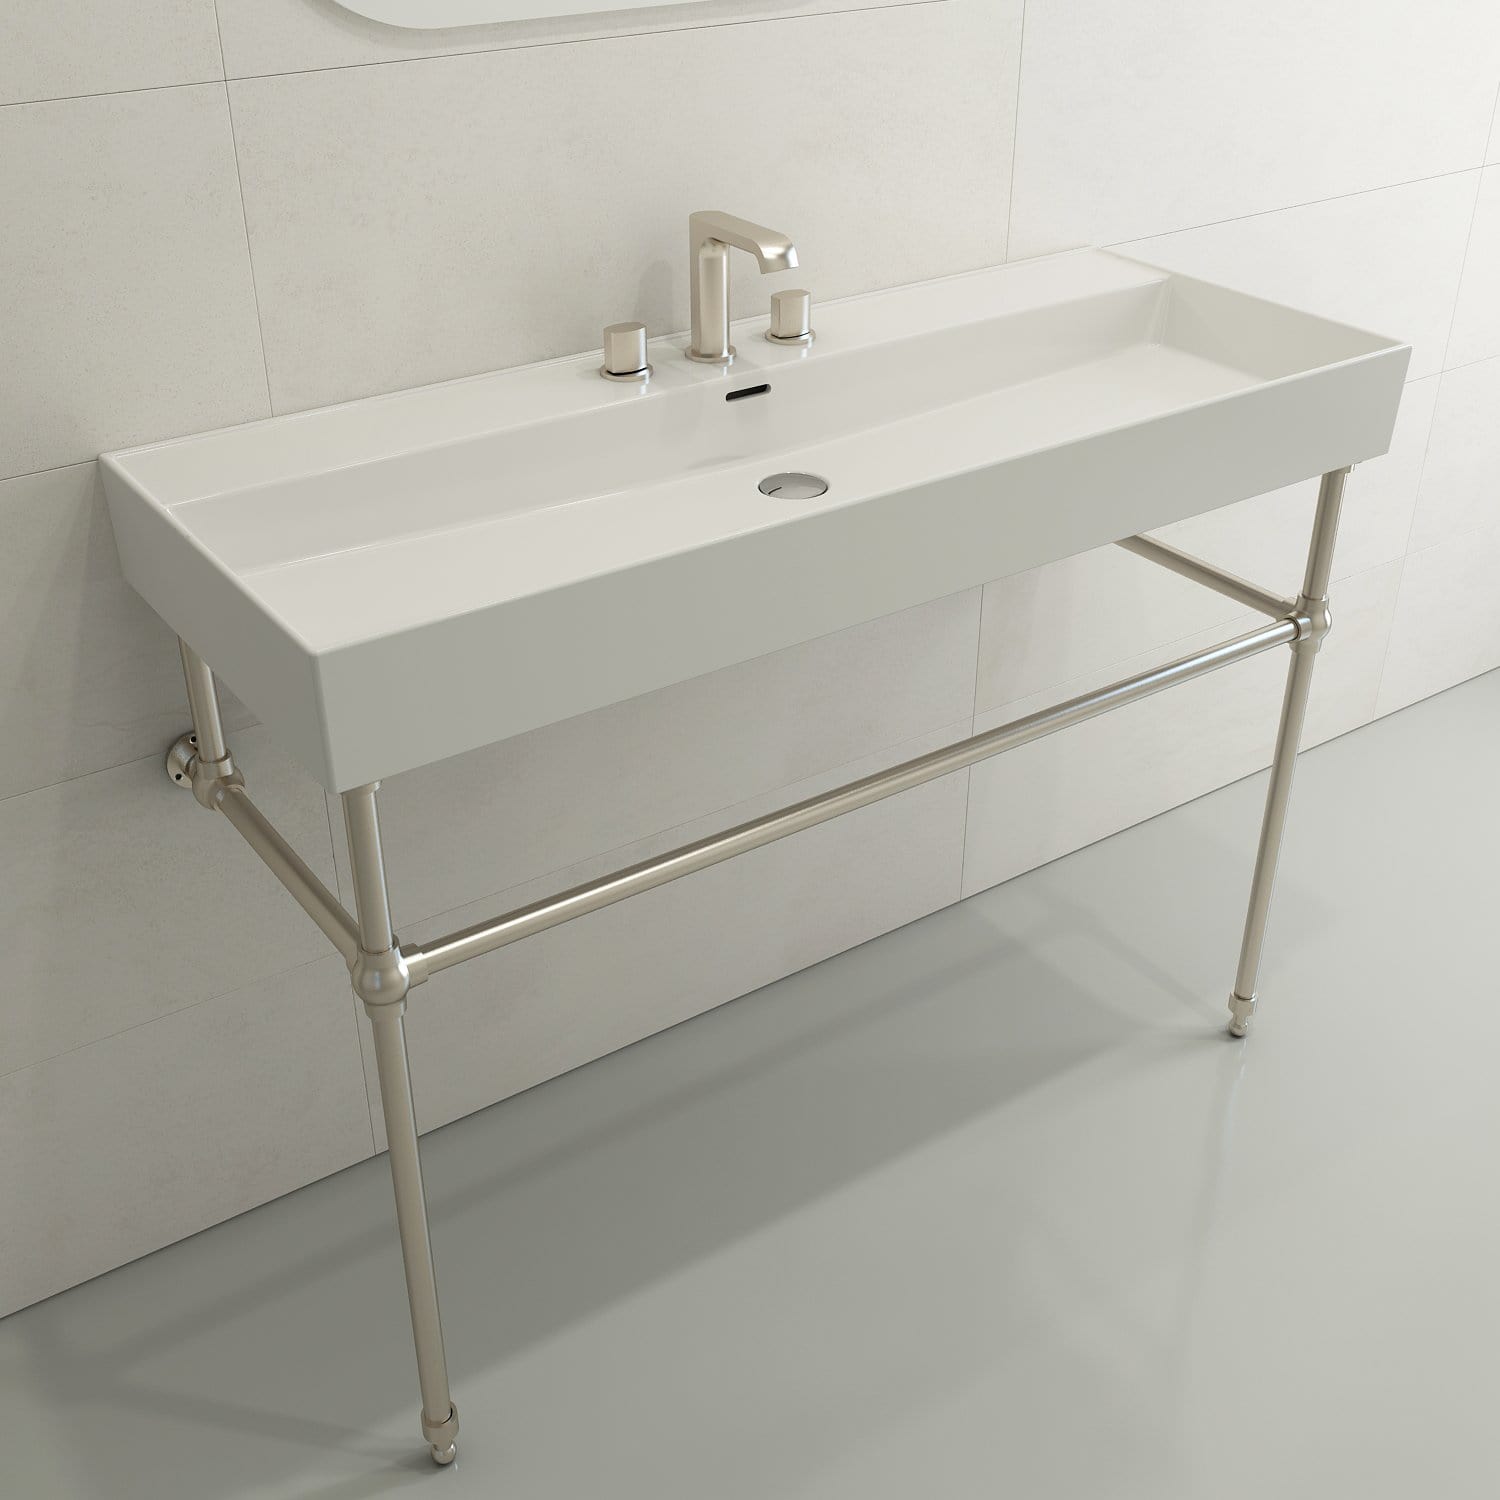 BOCCHI MILANO 47.75" Wall-Mounted Sink Fireclay 3-Hole With Overflow